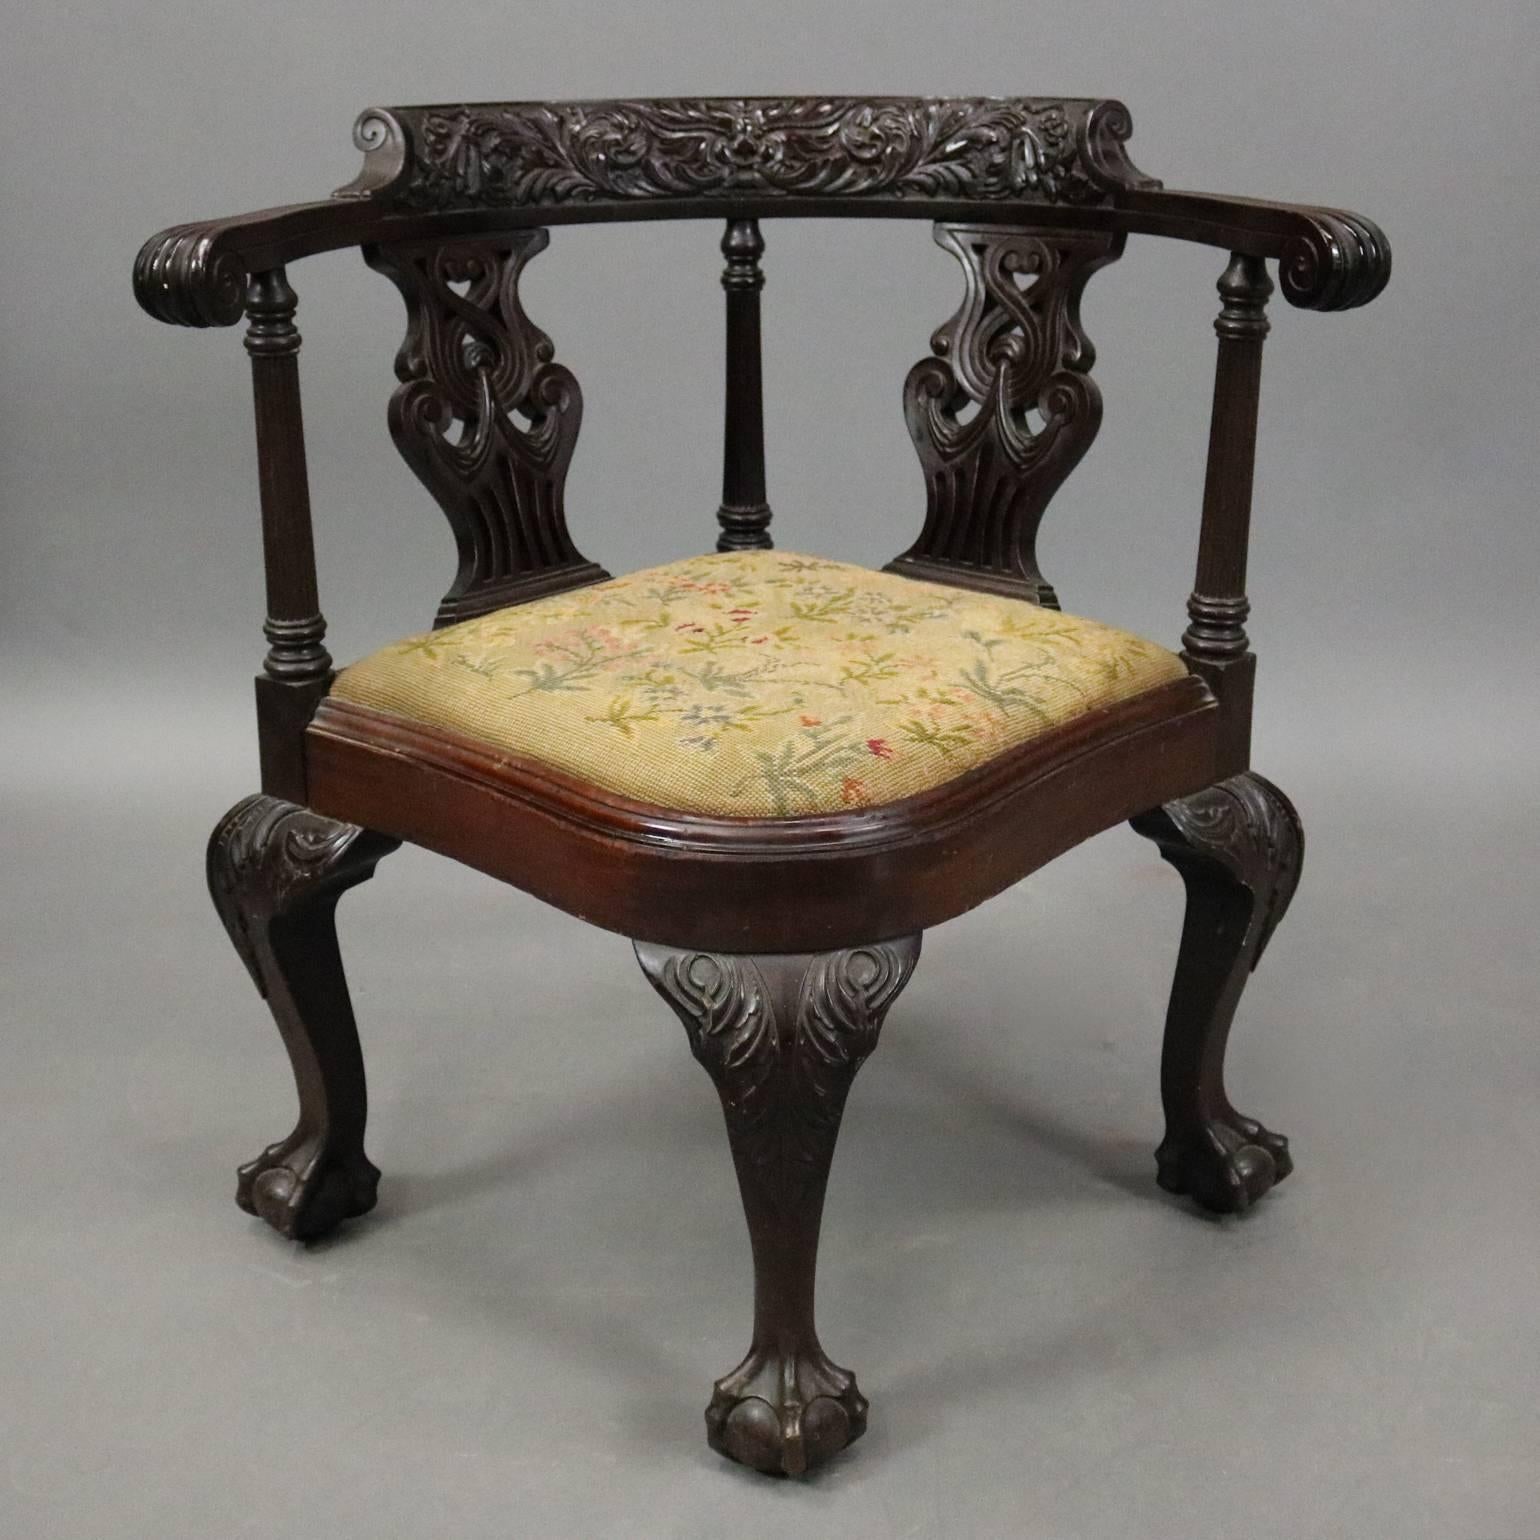 Antique Chippendale style corner chair features foliate carved frame with claw and ball feet and pierced back, needlepoint upholstered seat, circa 1880

Measures: 30.5" H x 29" W x 23.5" D, 17" seat height.